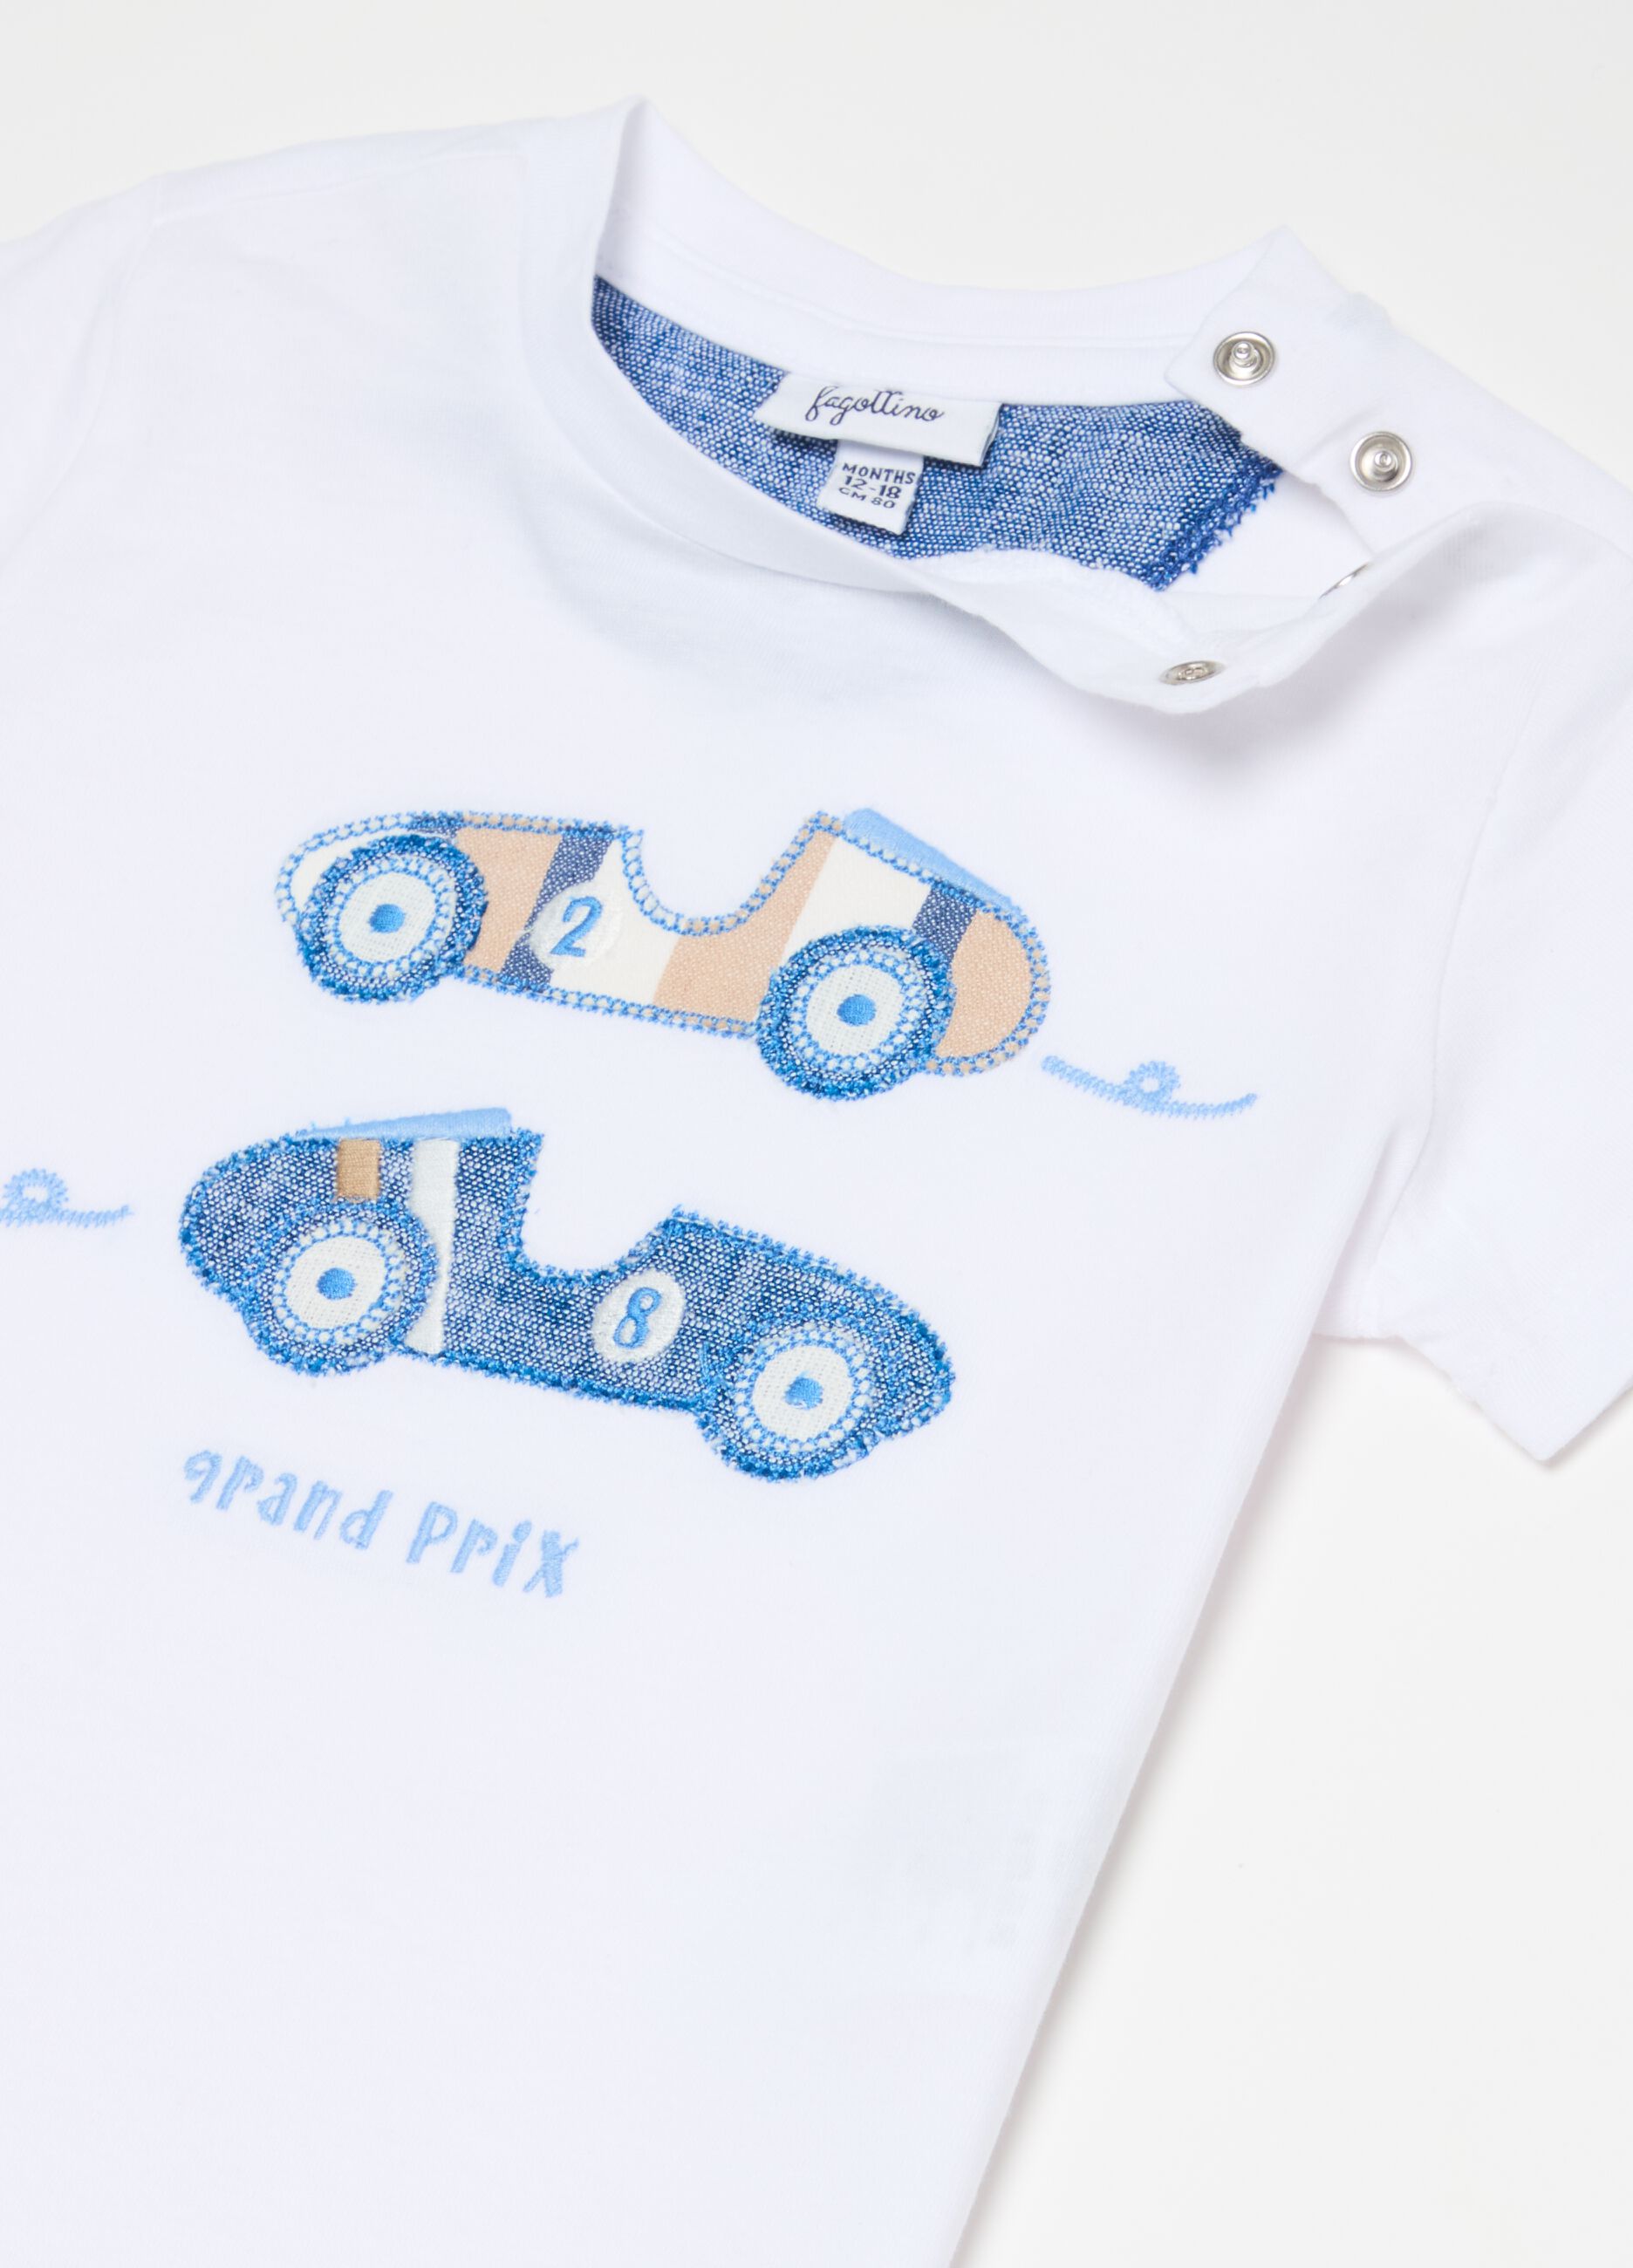 Cotton T-shirt with racing car patch